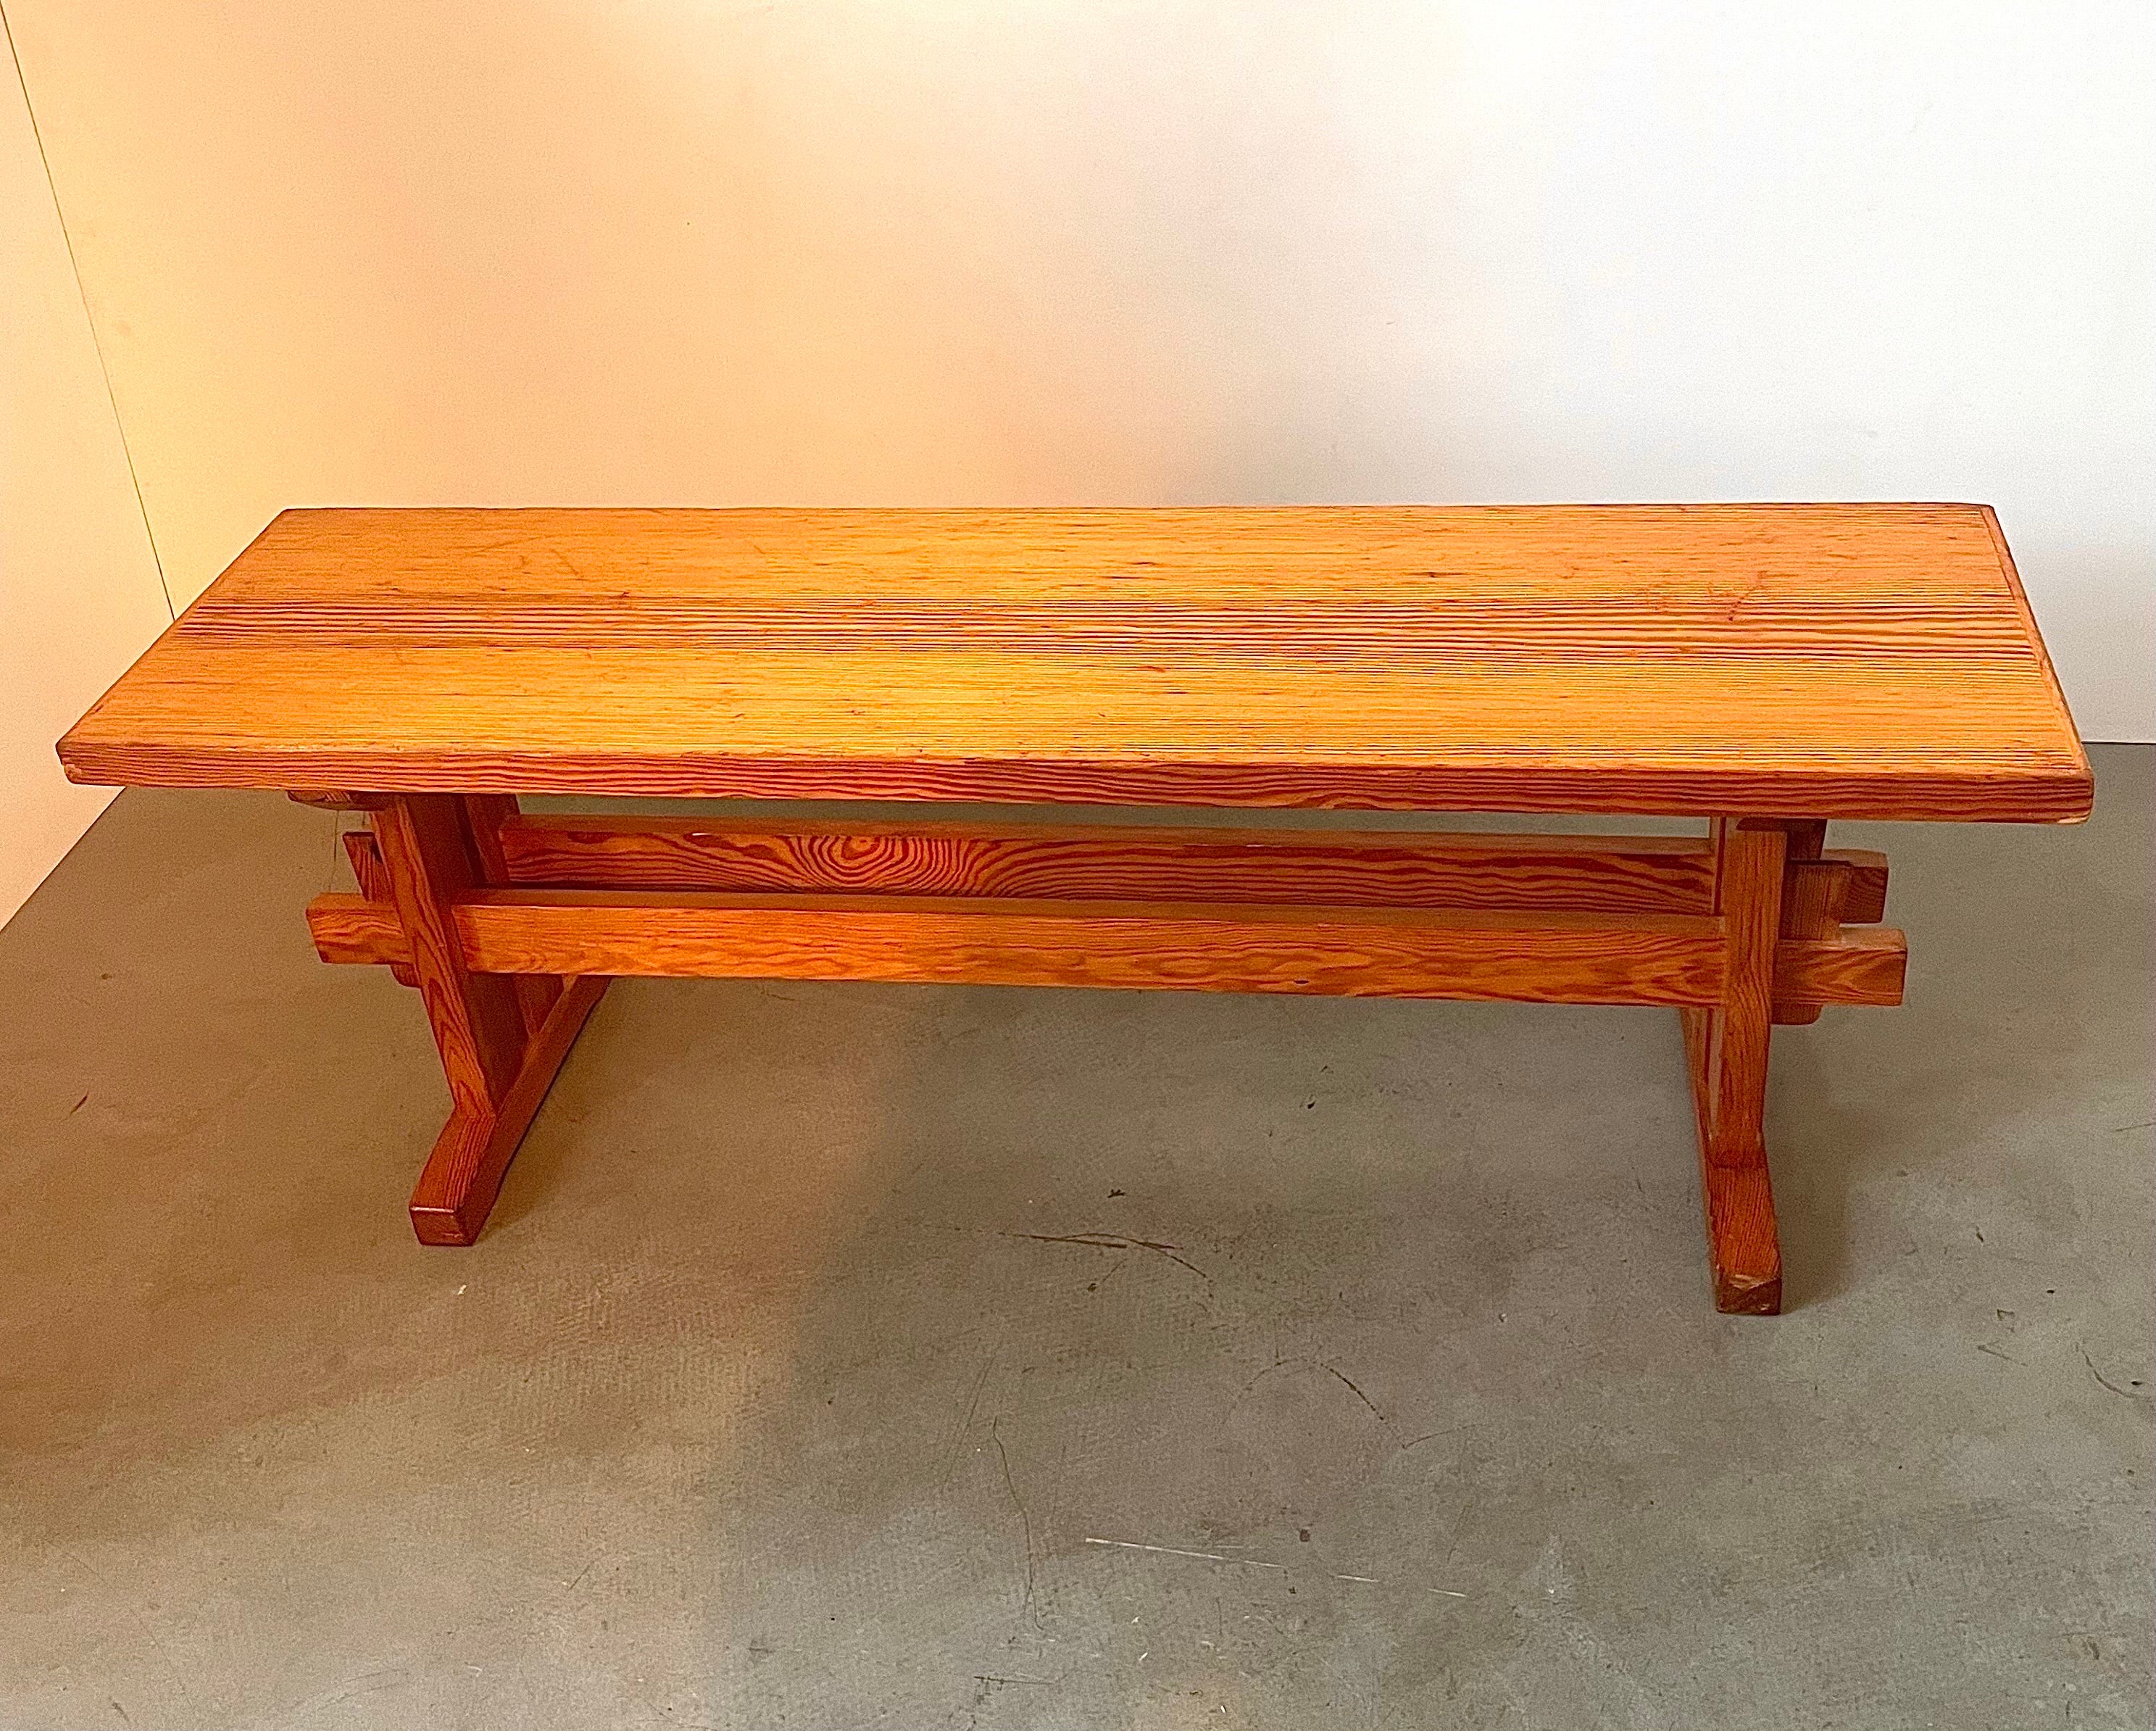 Handcrafted Charlotte Perriand style seating bench, 3 seat in a beautiful clear wood grain pattern pine wood. The finishing and detailing of the bench is really amazing; notice the wonderful multiple angle wood cutting, the double lower crossbars